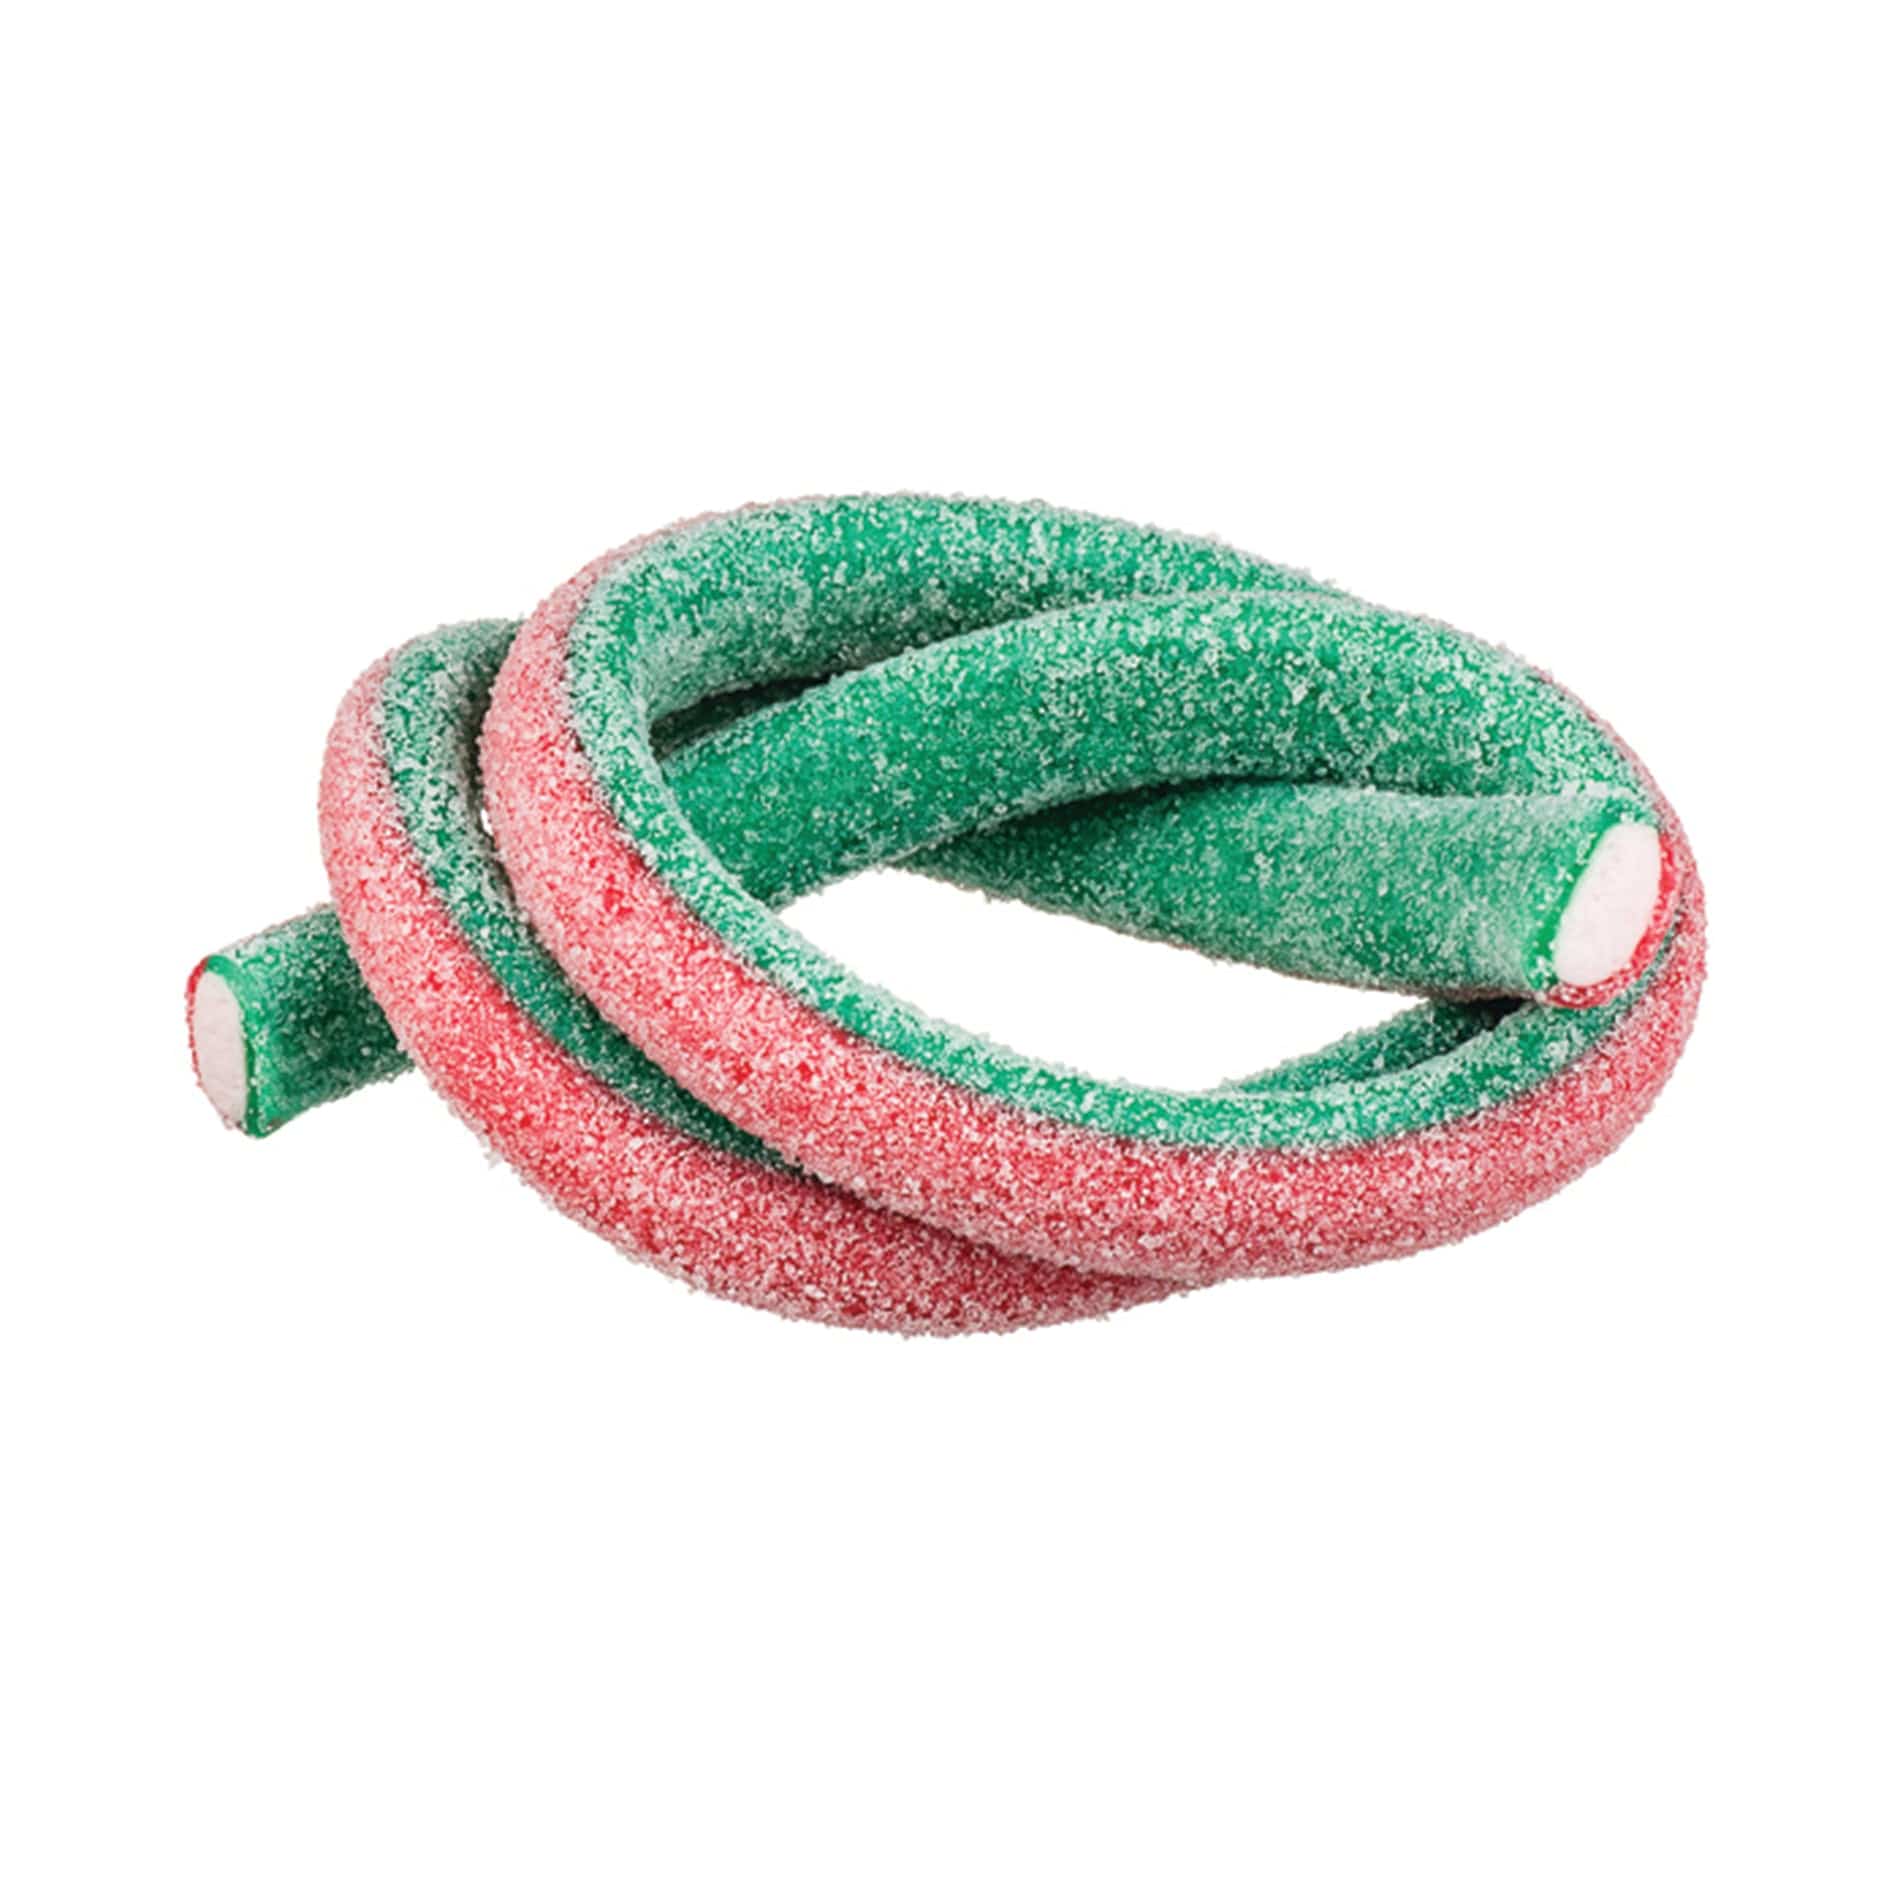 Meeega Cables Gummy Rope SOUR WATERMELON STRAWBERRY Copy of Meeega Cables European Chewy Rope Candy - Custom 12-Pack individually wrapped Meeega Cables, each over 2-feet long cups with lids and straws